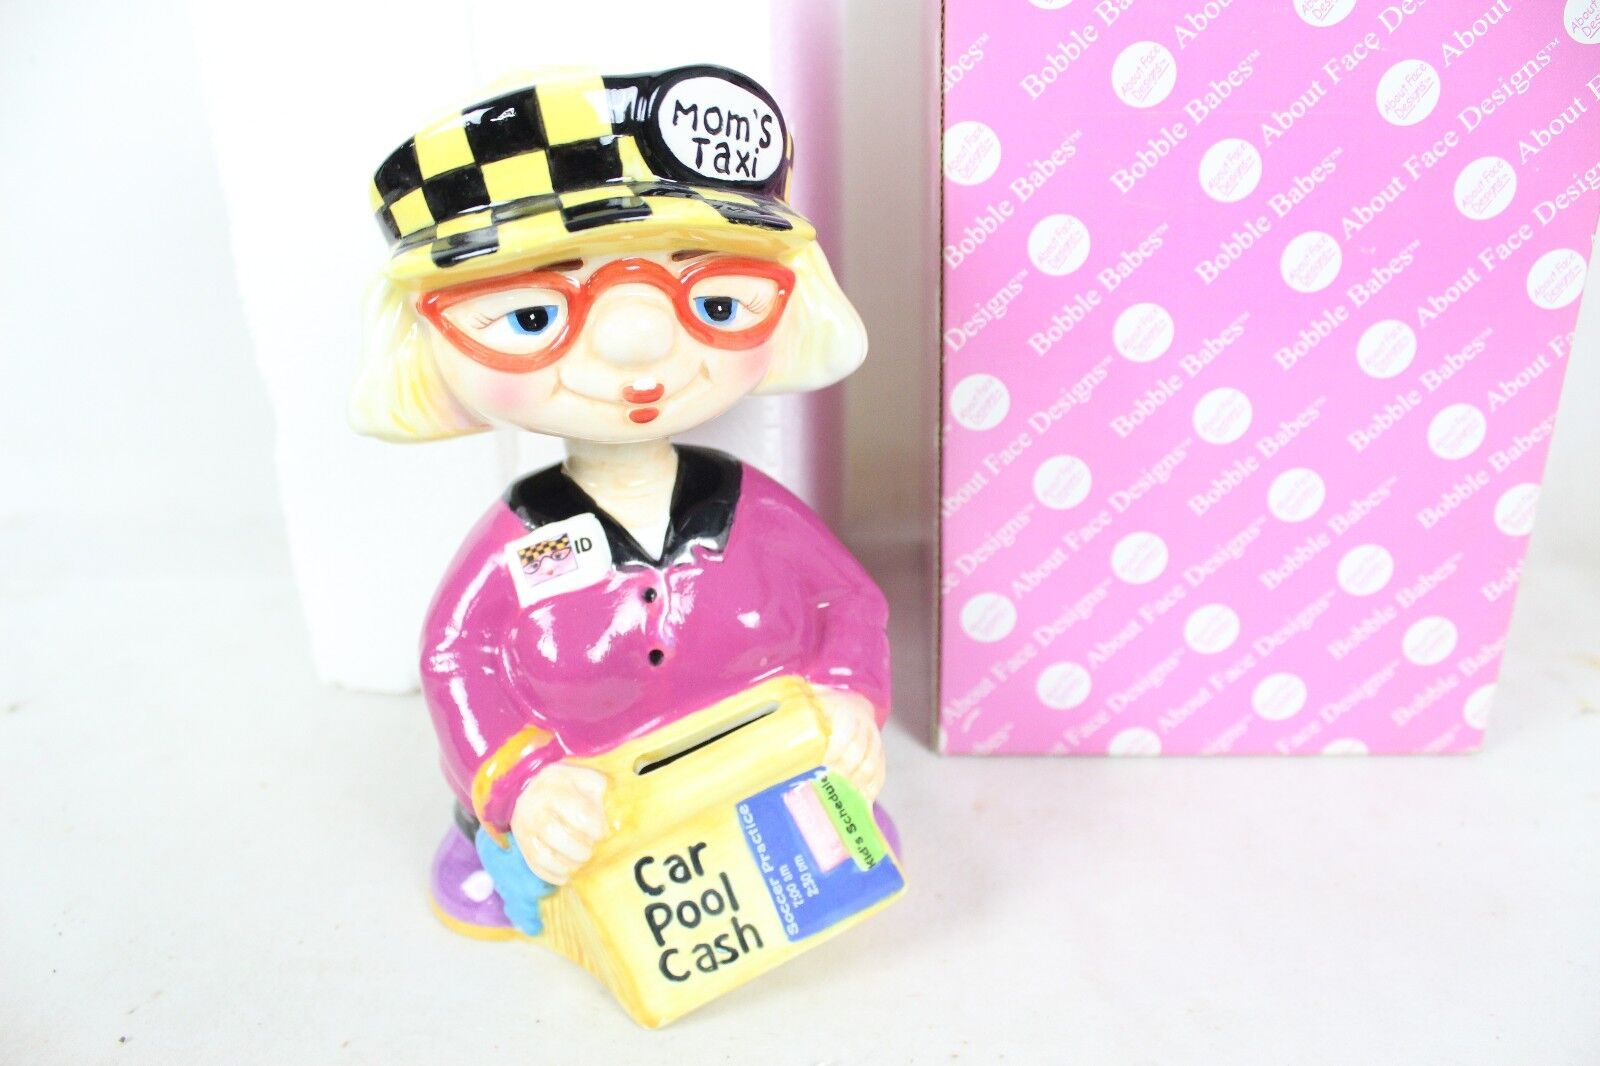 NIB New Bobble Head Babes Mom\'s Taxi Mother\'s Day Present Funny Cool Bank Toy